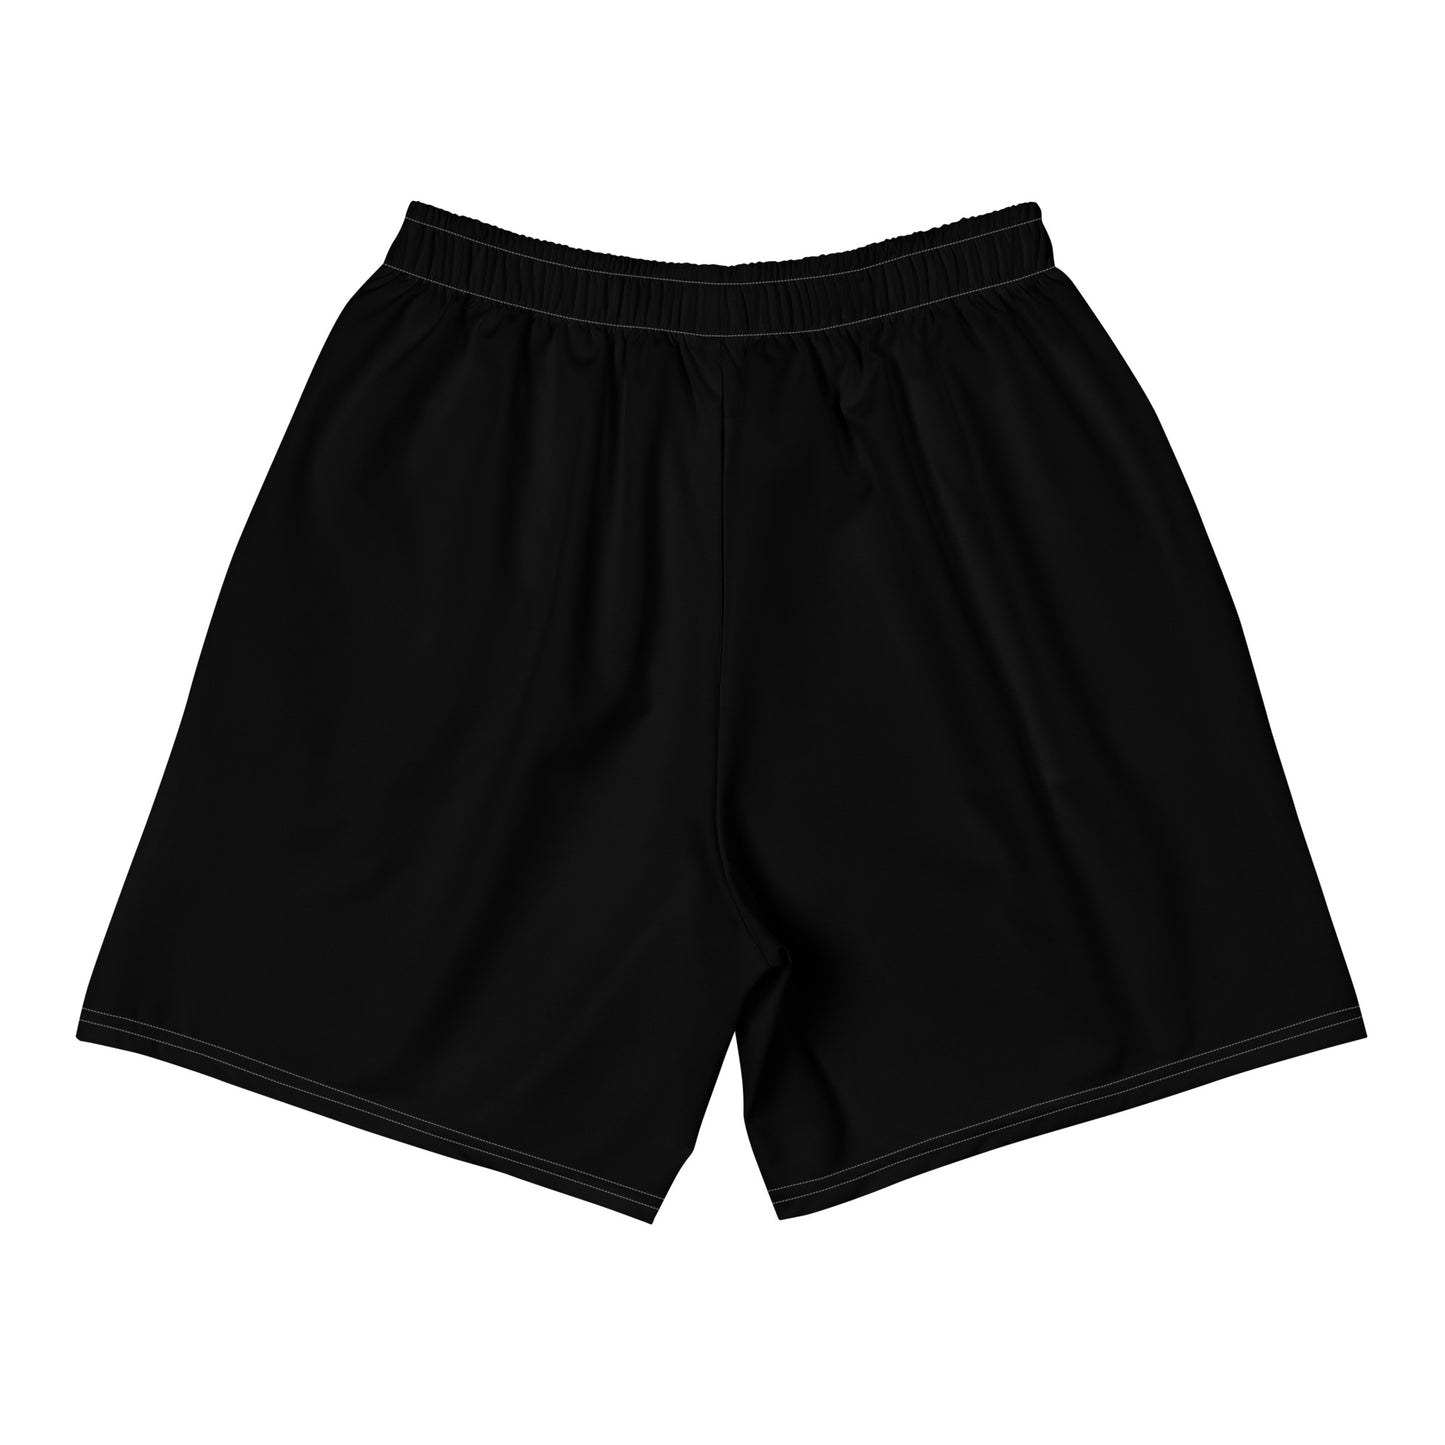 KRATOS Men's Recycled Athletic Shorts